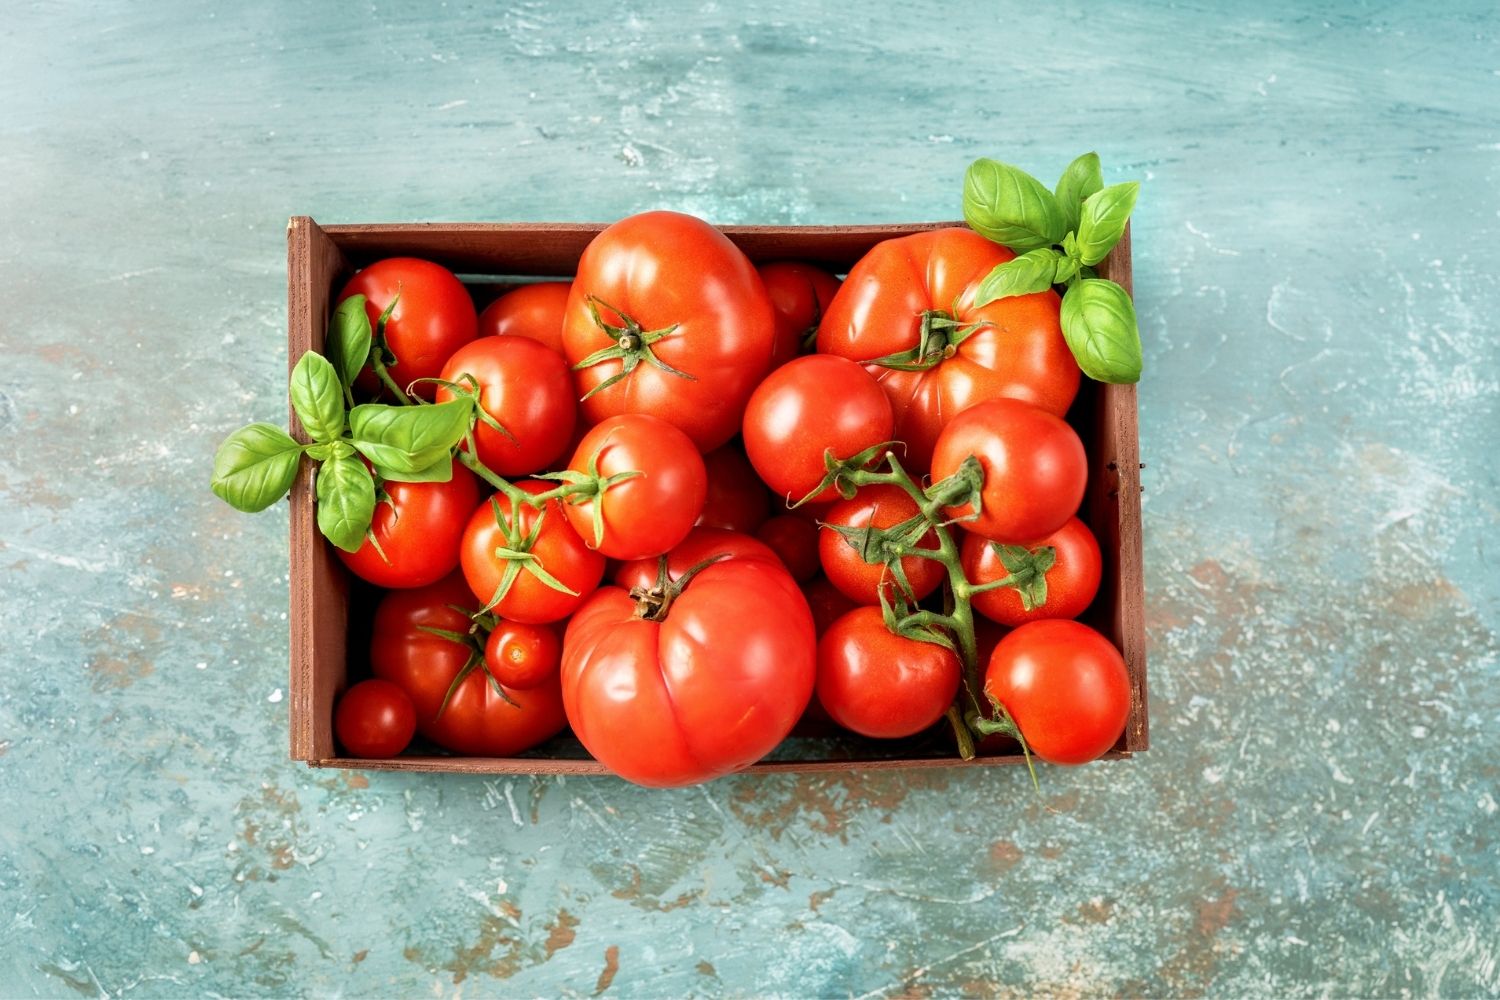 How to Store Tomatoes